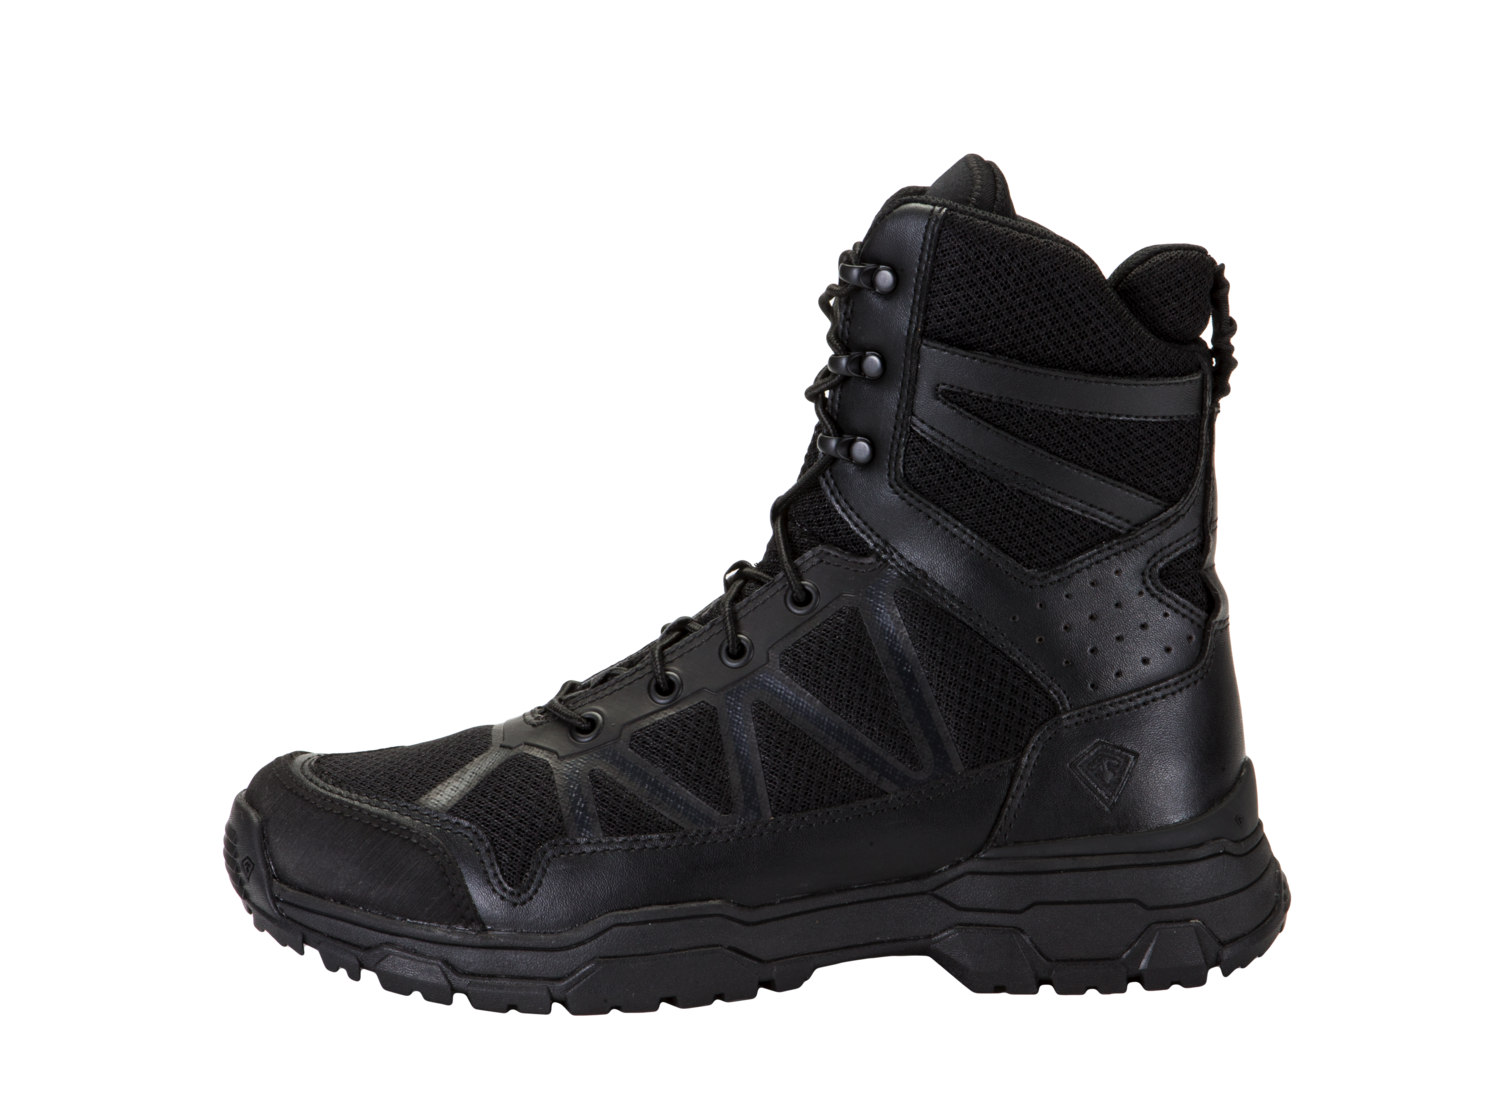 First Tactical Men's 7“ Operator Boot